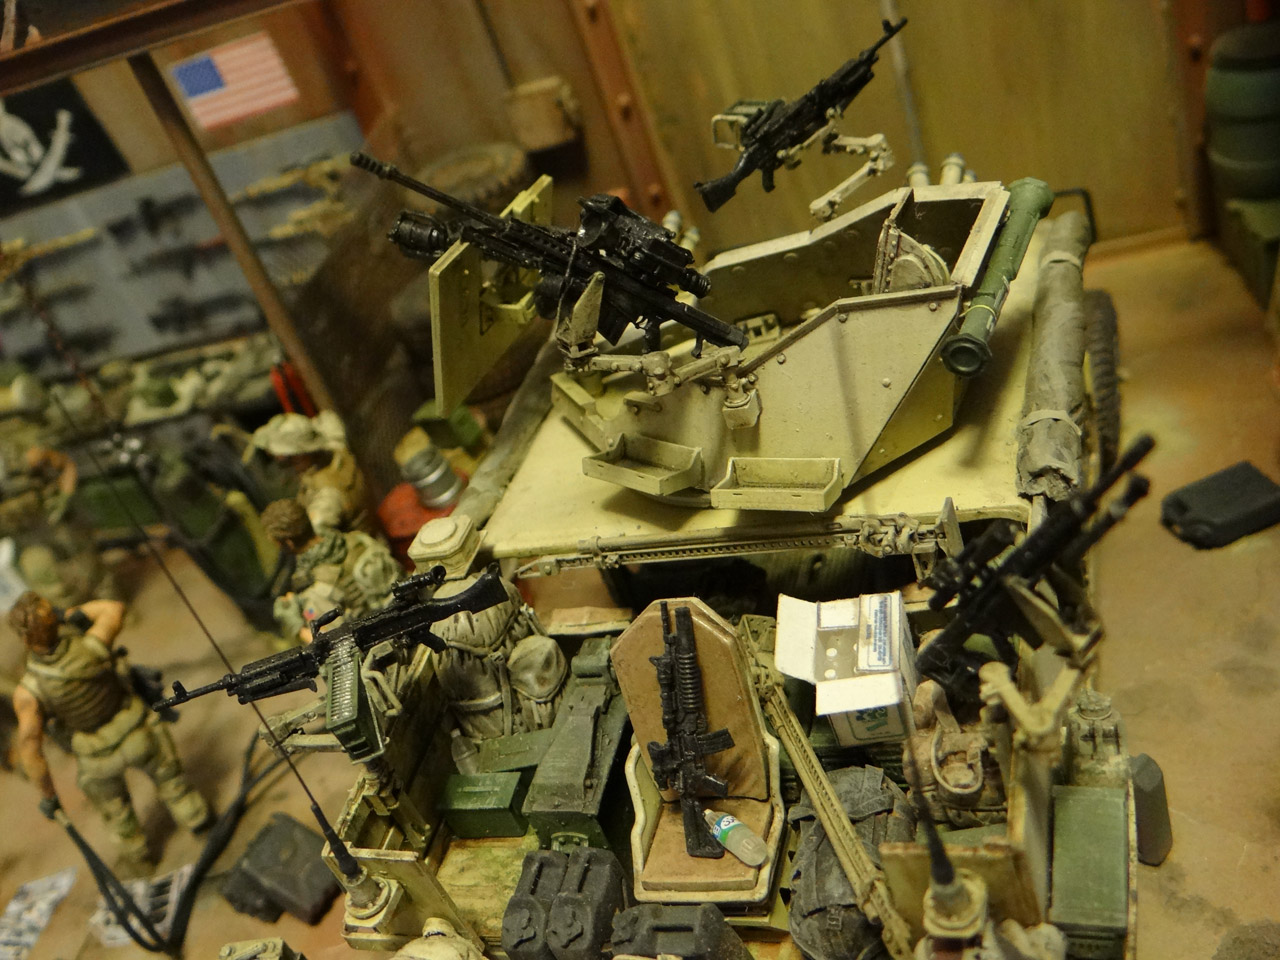 Dioramas and Vignettes: Enforcement to democracy, photo #11